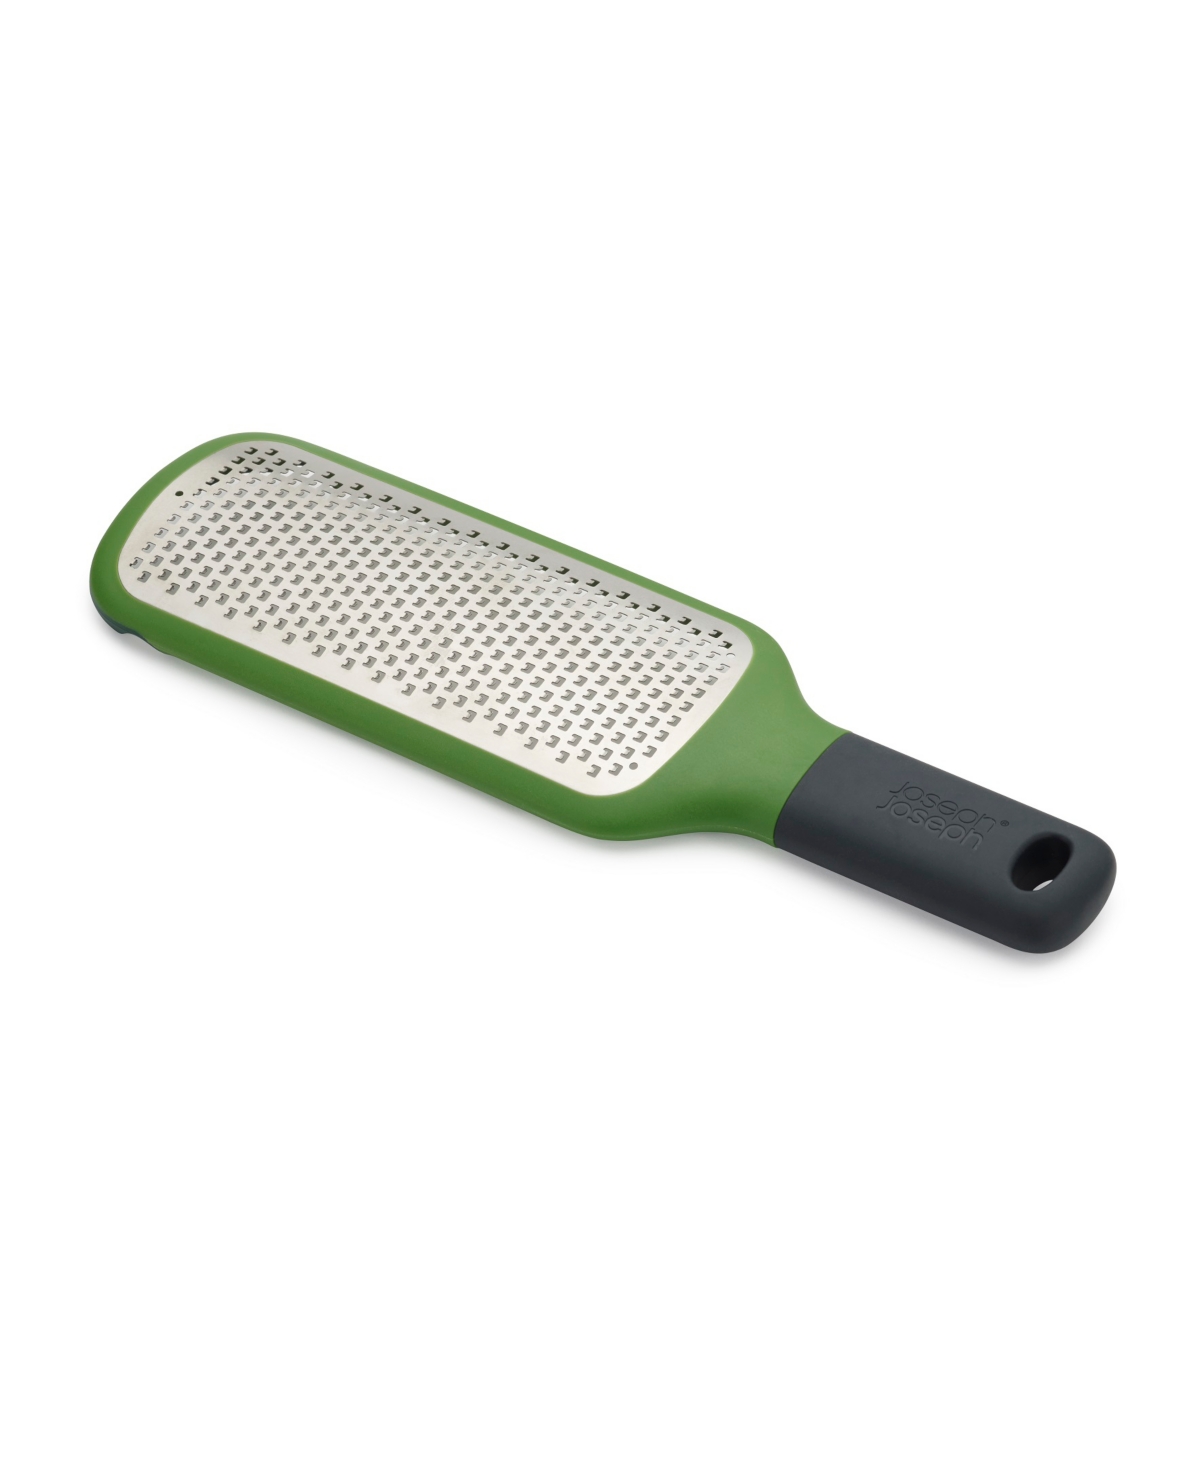 Joseph Joseph Gripgrater Paddle Grater With Bowl Grip Fine In Green